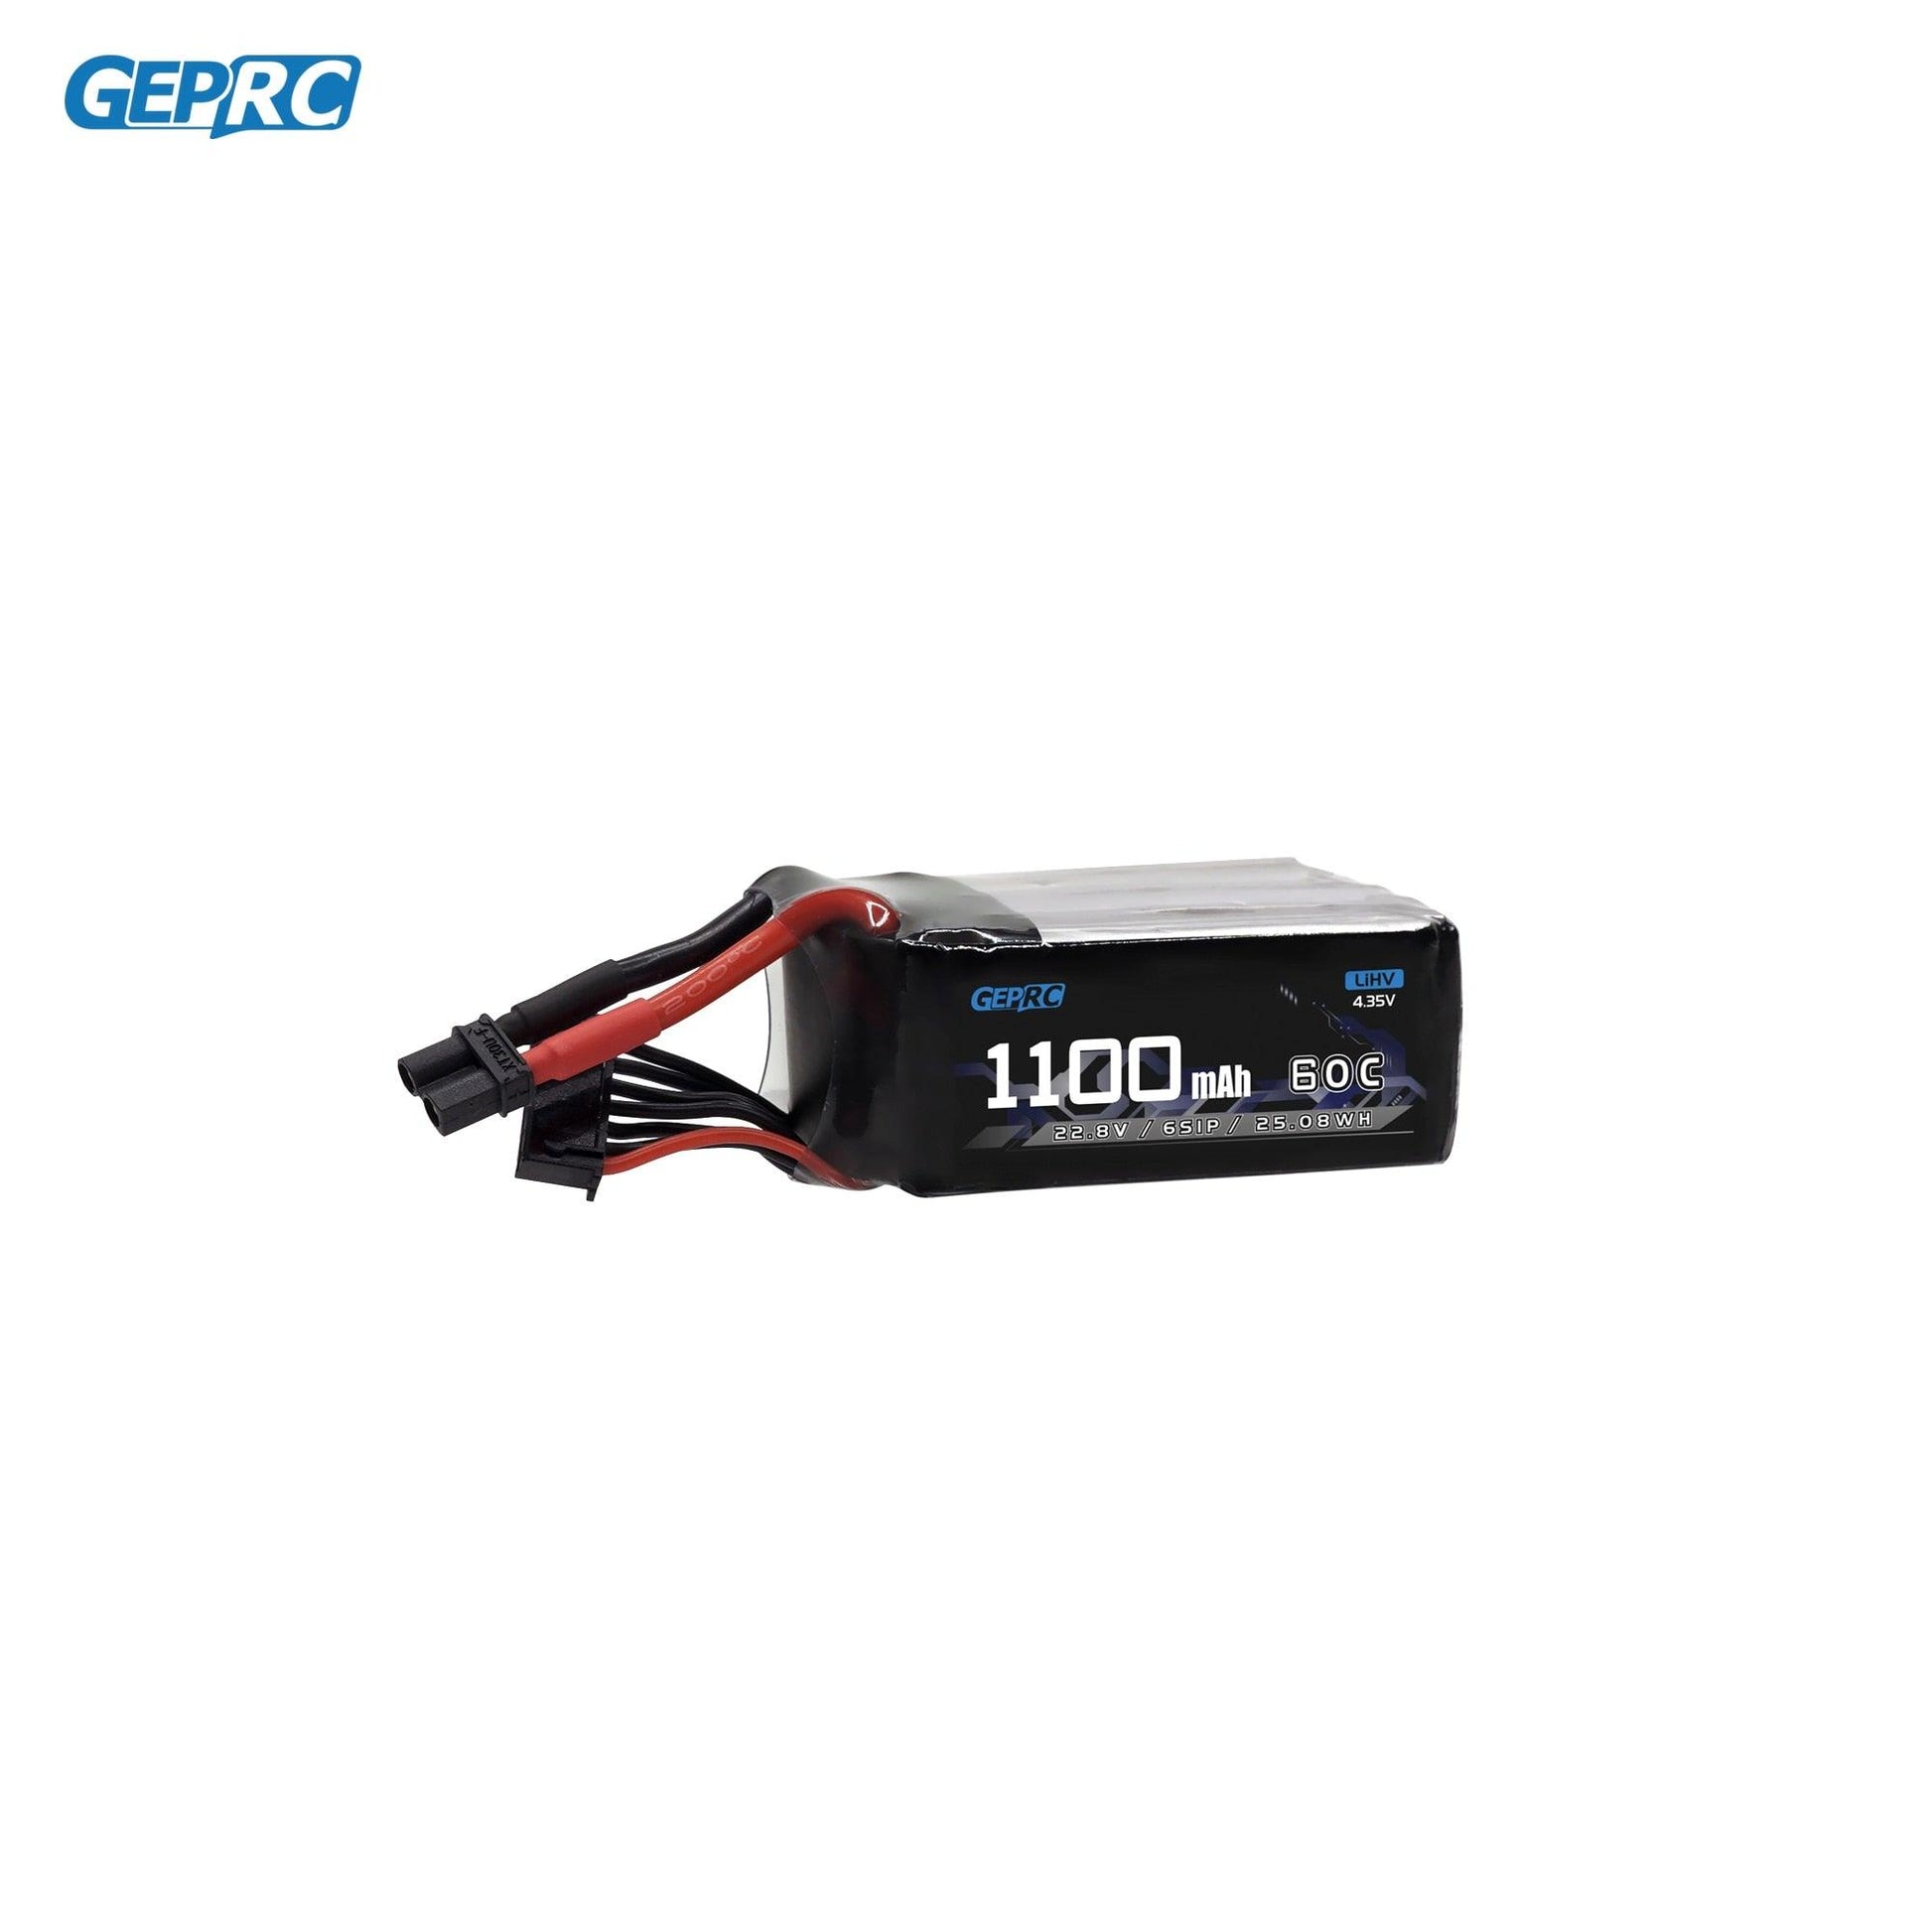 GEPRC 6S 1100mAh 60C LiPo Battery - Suitable For 3-5Inch Series Drone For RC FPV Quadcopter Freestyle Drone Accessories Parts FPV Drone Battery - RCDrone